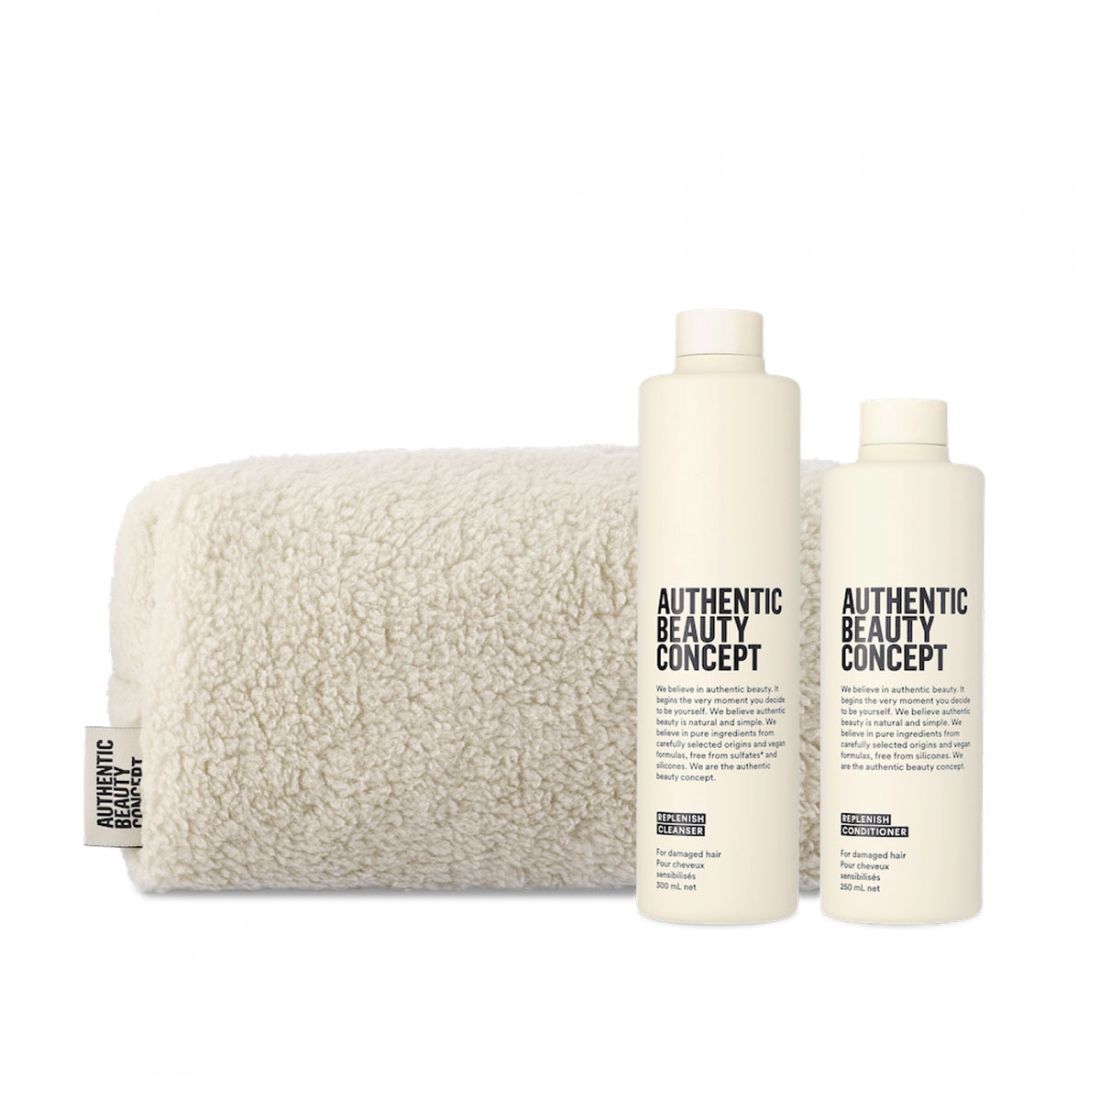 Authentic Beauty Concept Replenish Xmas Bag (Shampoo 300ml, Conditioner 250ml, FREE Pouch)